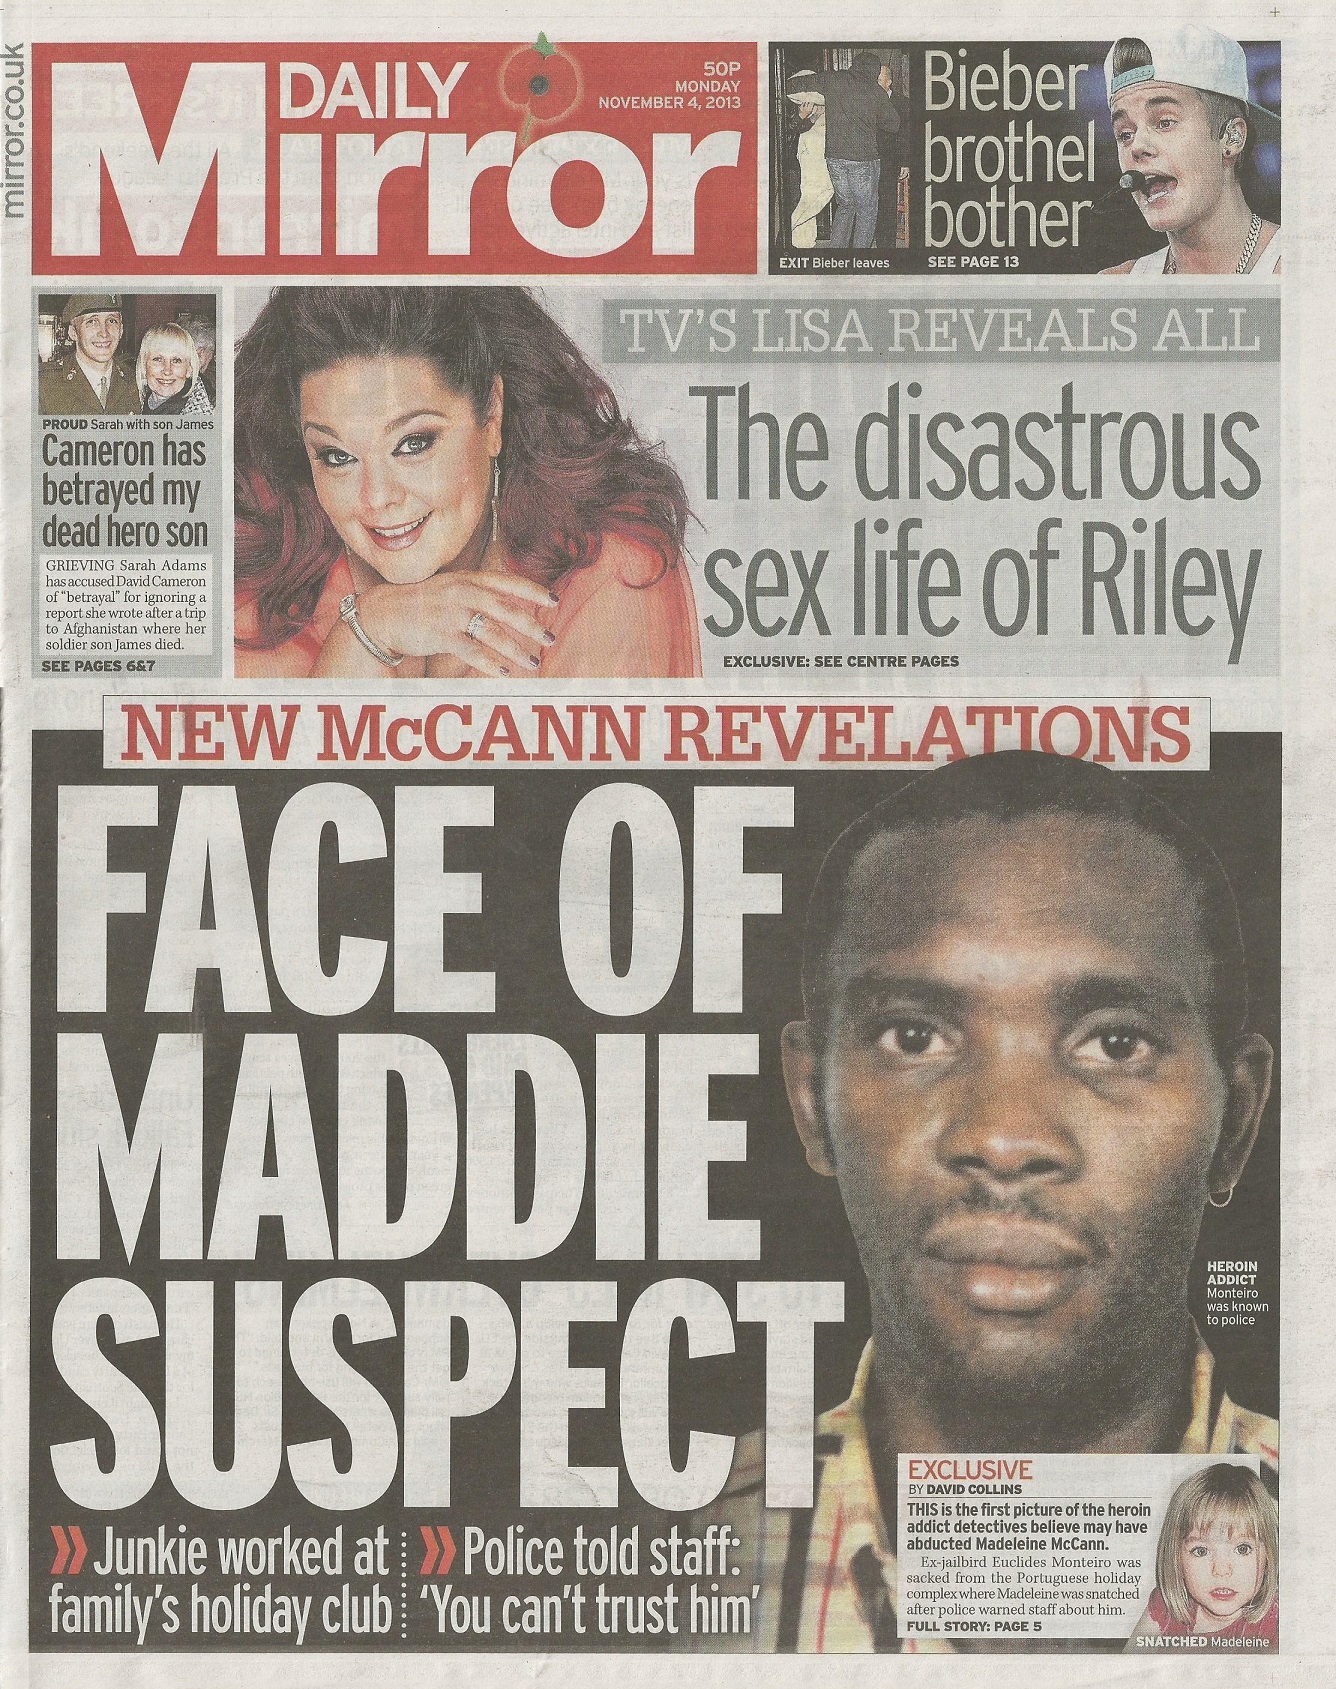 Daily Mirror, paper edition, front page: 'NEW MCCANN REVELATIONS - FACE OF MADDIE SUSPECT', 04 November 2013